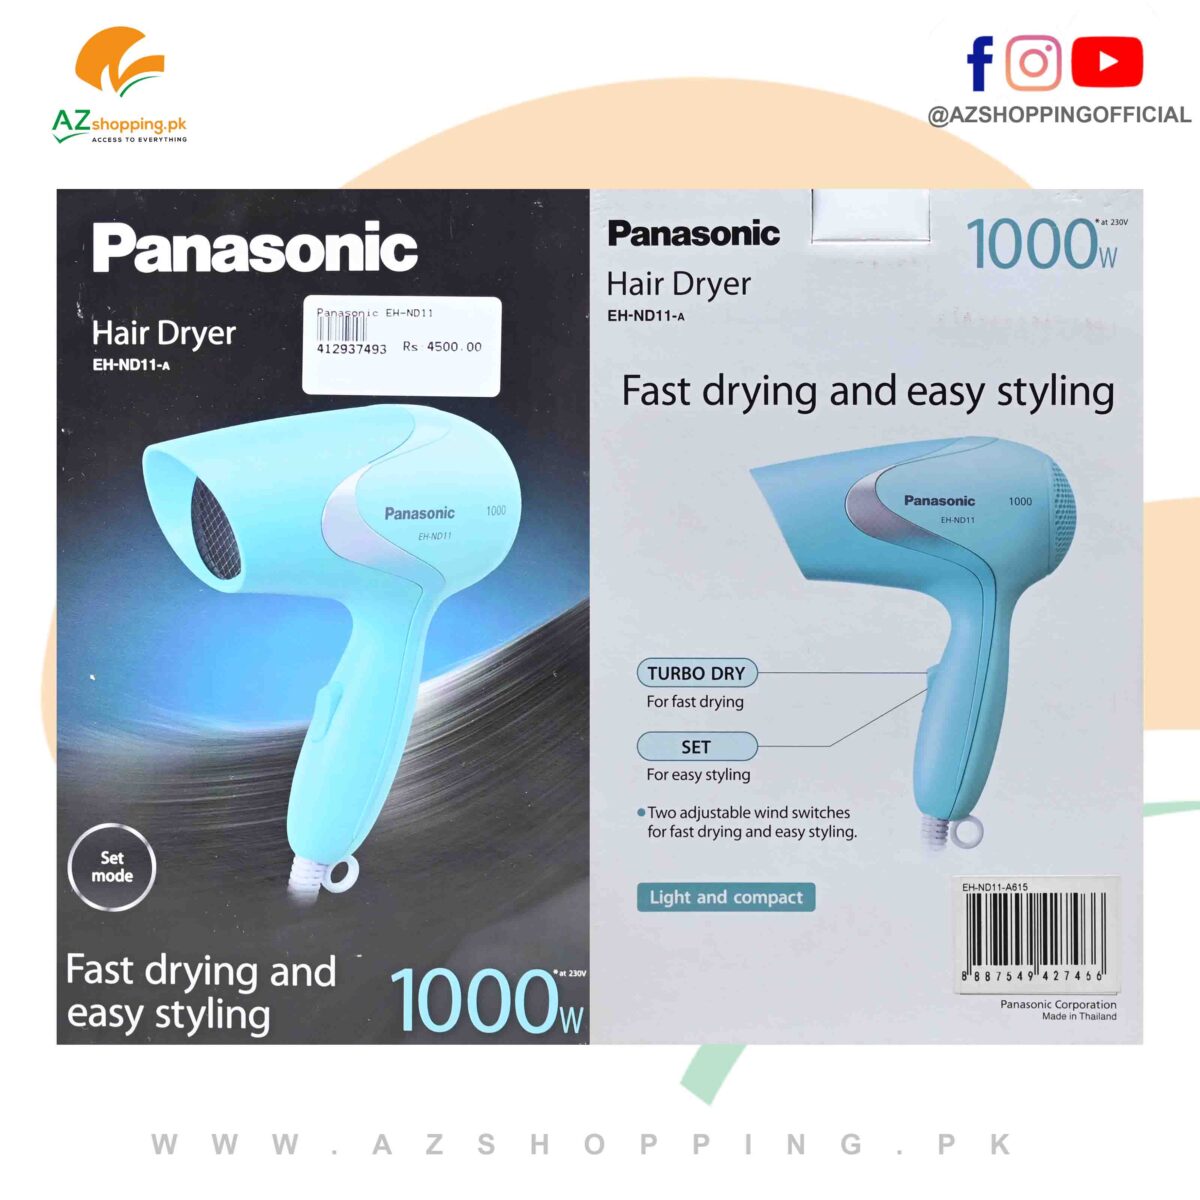 Panasonic – Hair Dryer Blower For Fast Drying and Easy Styling 1000W with 2-Heat Speed Setting (Fast Dry, Hot, Cold Wind Speed) – Model: EH-ND11-A